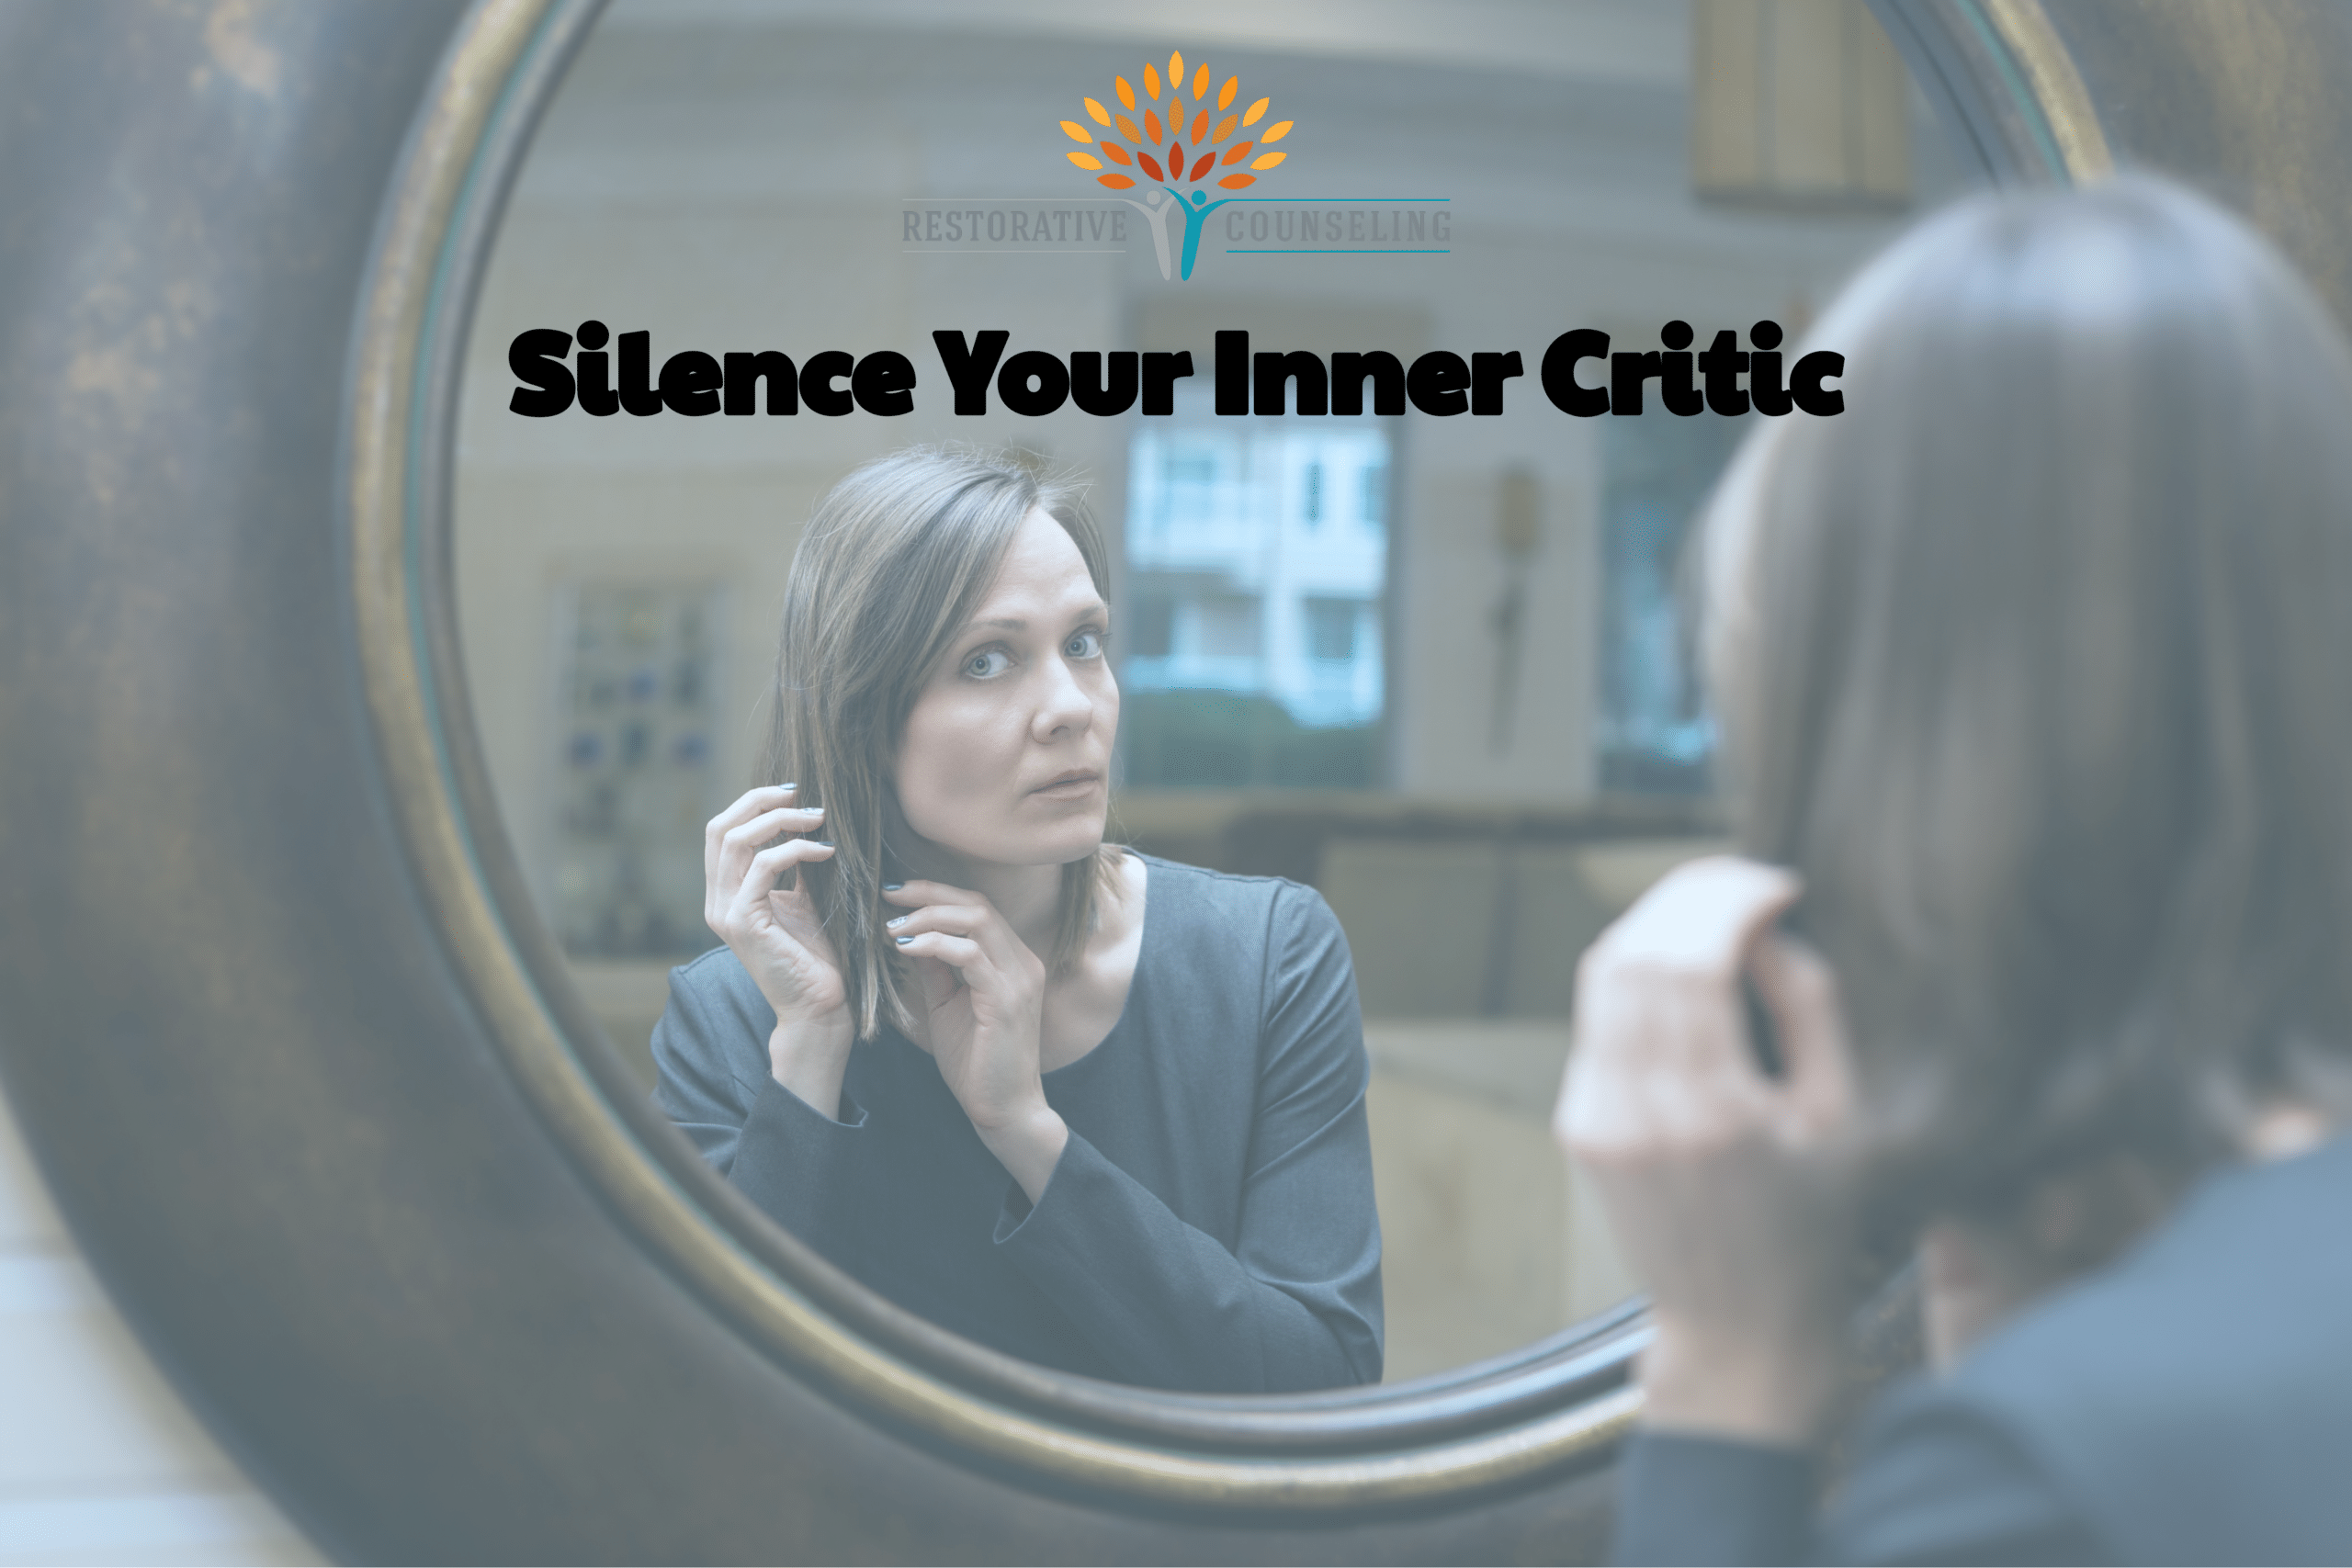 Silence your inner critic